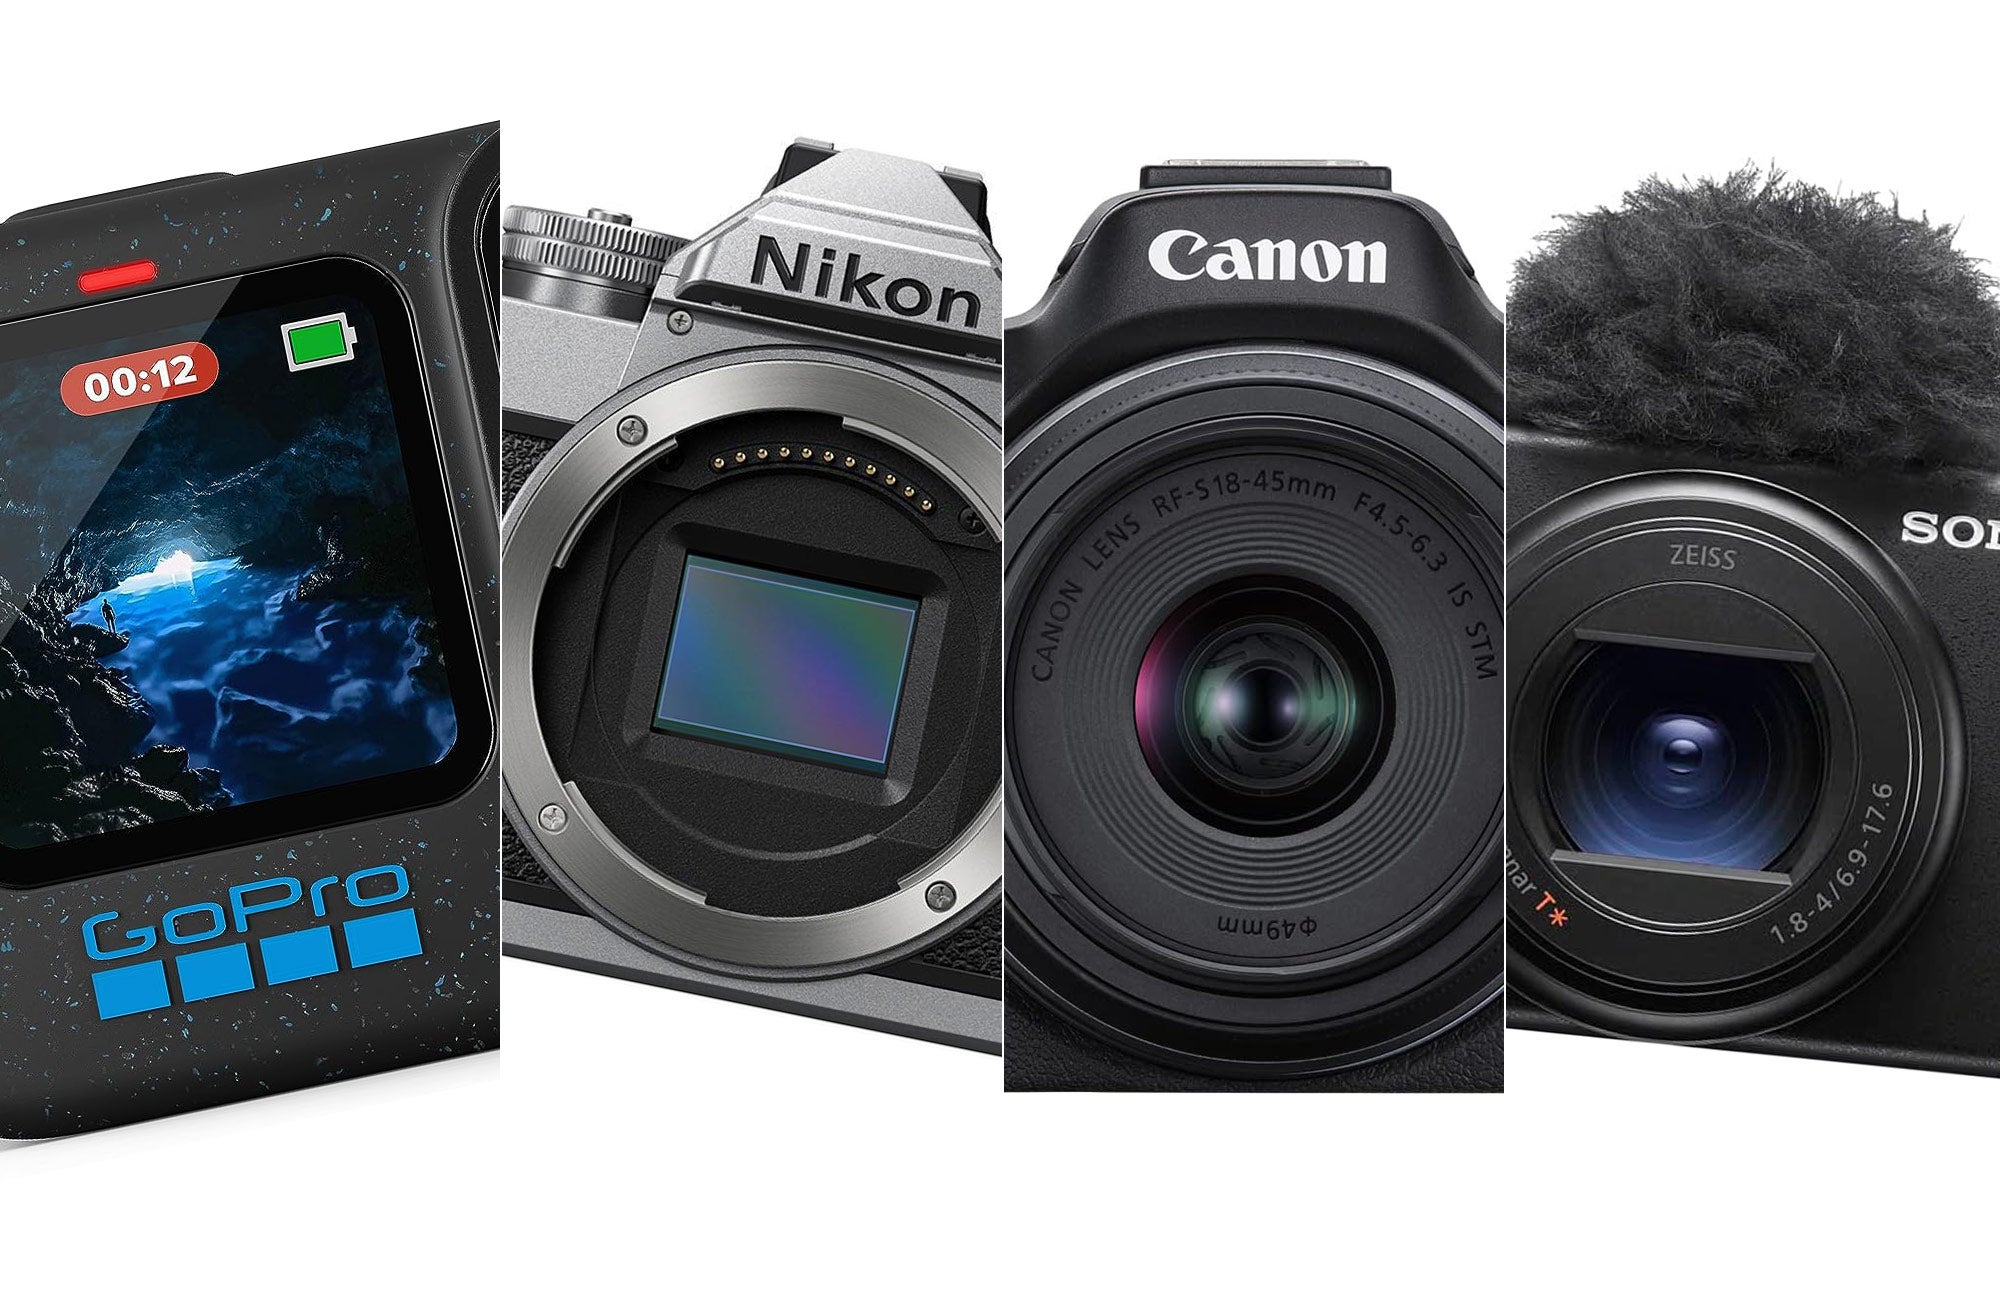 The best cameras under $1,000 in 2023, according to experts